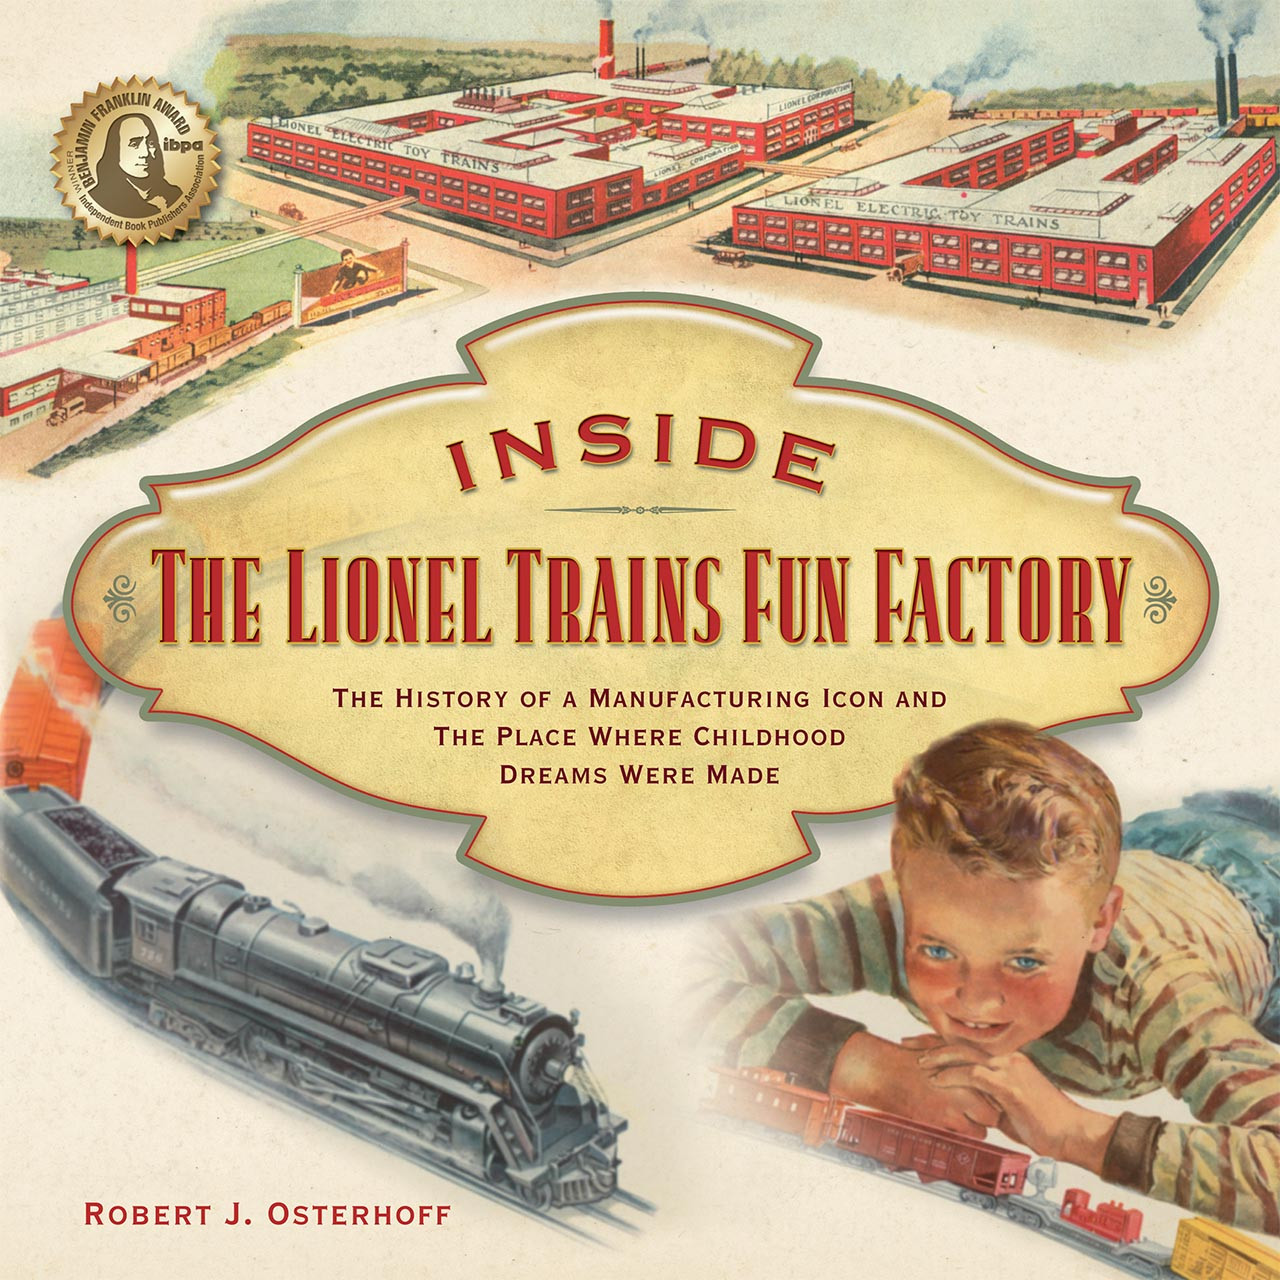 Inside The Lionel Trains Fun Factory The History of a Manufacturing
Icon and The Place Where Childhood Dreams Were Made Epub-Ebook